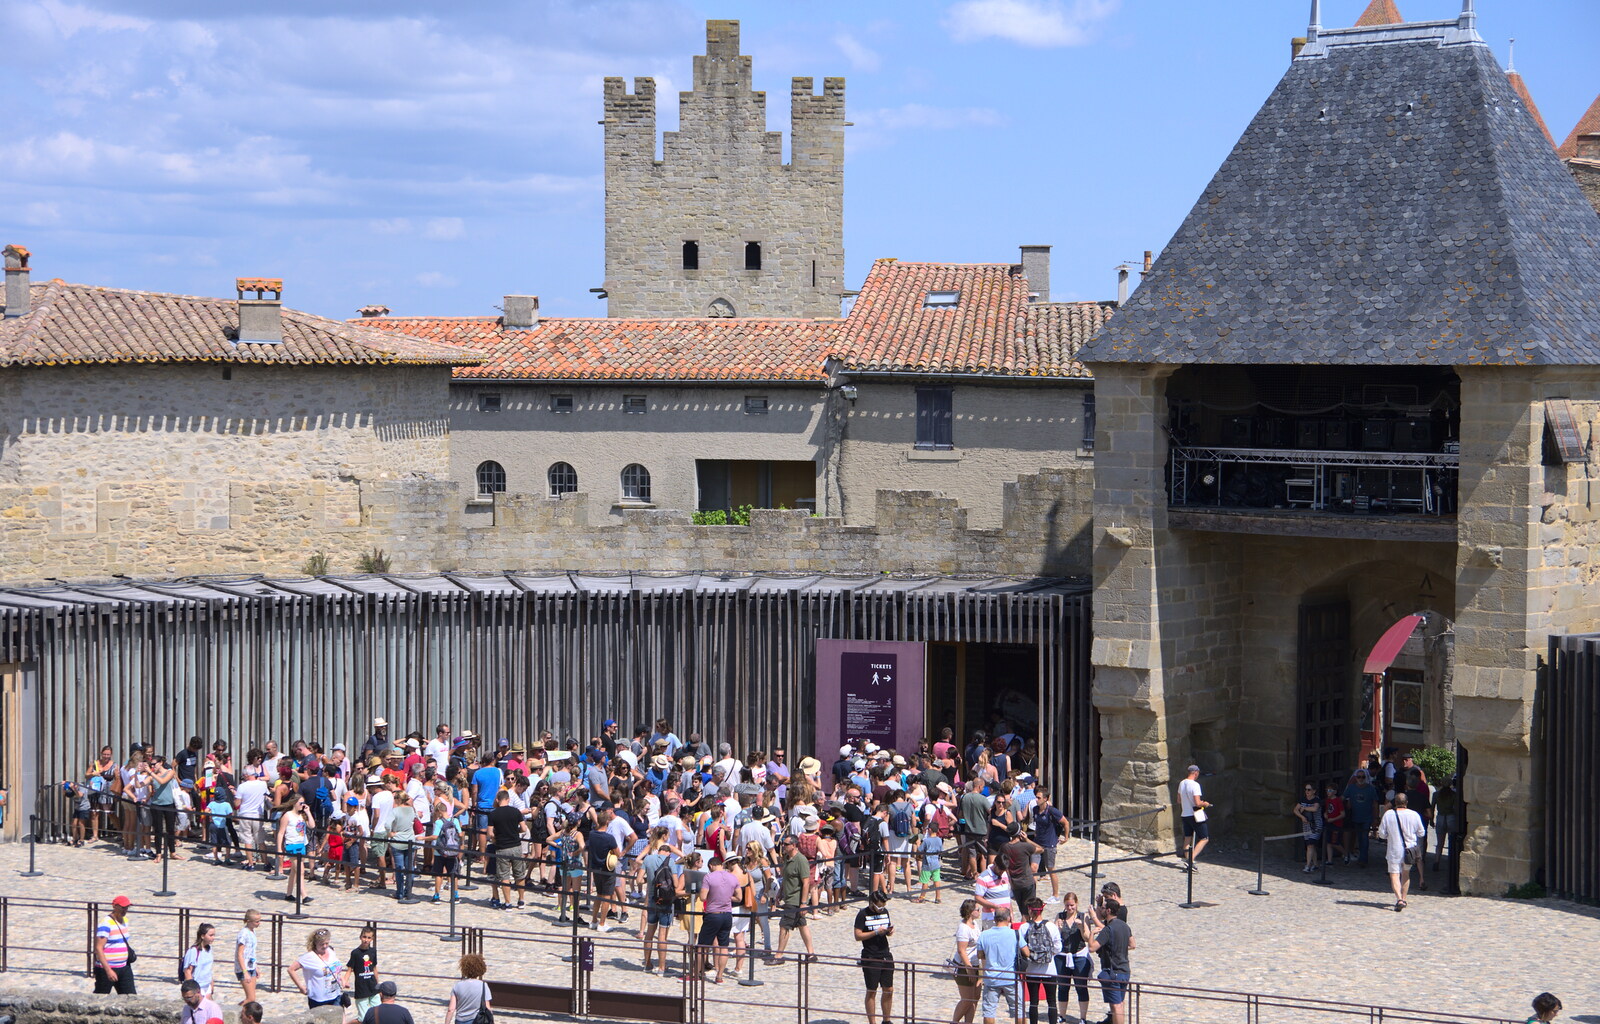 There's a massive queue for tickets from The Château Comtal, Lastours and the Journey Home, Carcassonne, Aude, France - 14th August 2018